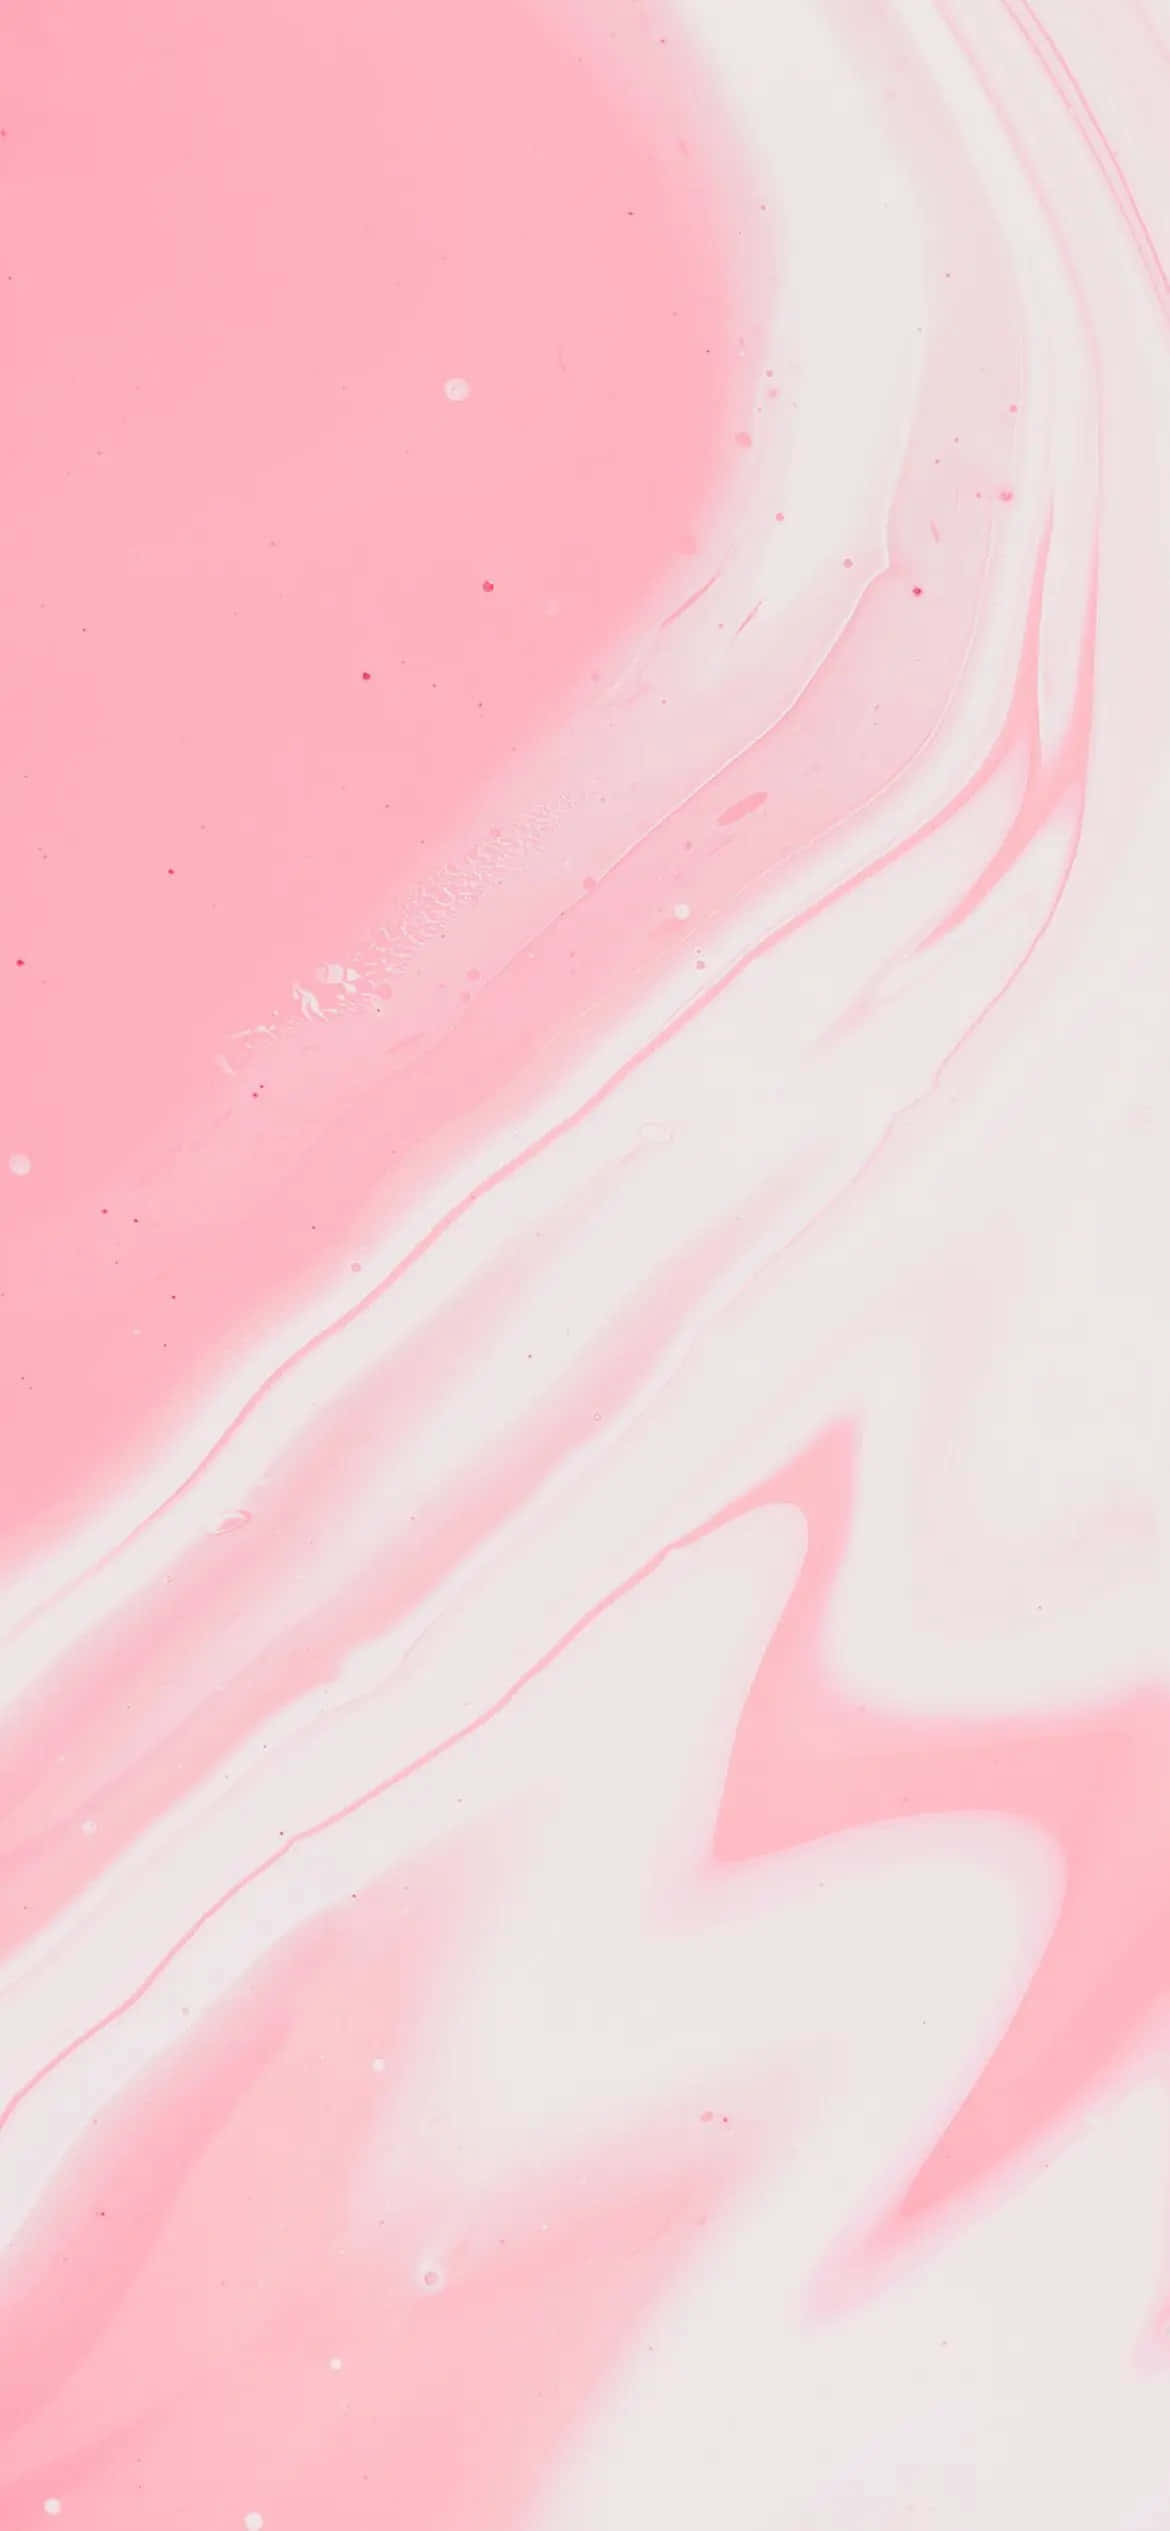 A Pink Liquid With Swirls Of White And Pink